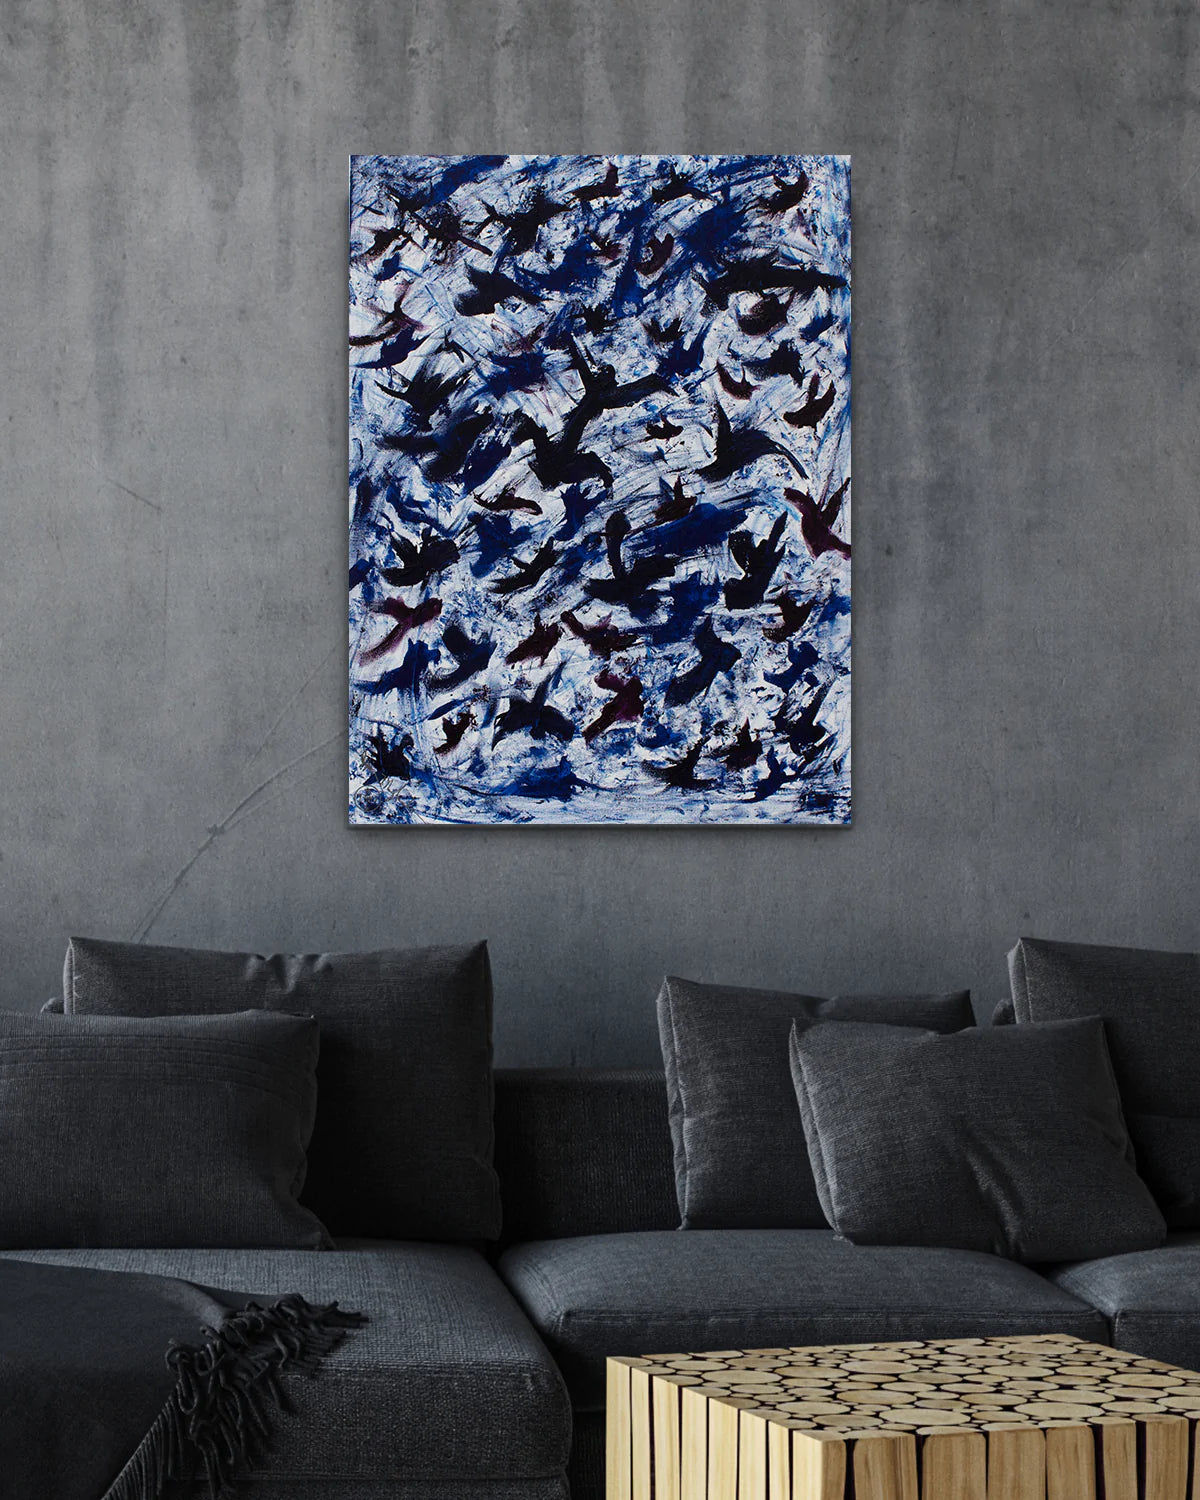 Blue Angels by Jumper Maybach®
From the Pride Series
 flying high!
30" x 40"
Acrylic Mixed media on canvas 2018

Do you own a Jumper Maybach, yet? ®
Seek LOVE, PEACEBlue Angels        PNTArtworkJumper MaybachJumper Maybach